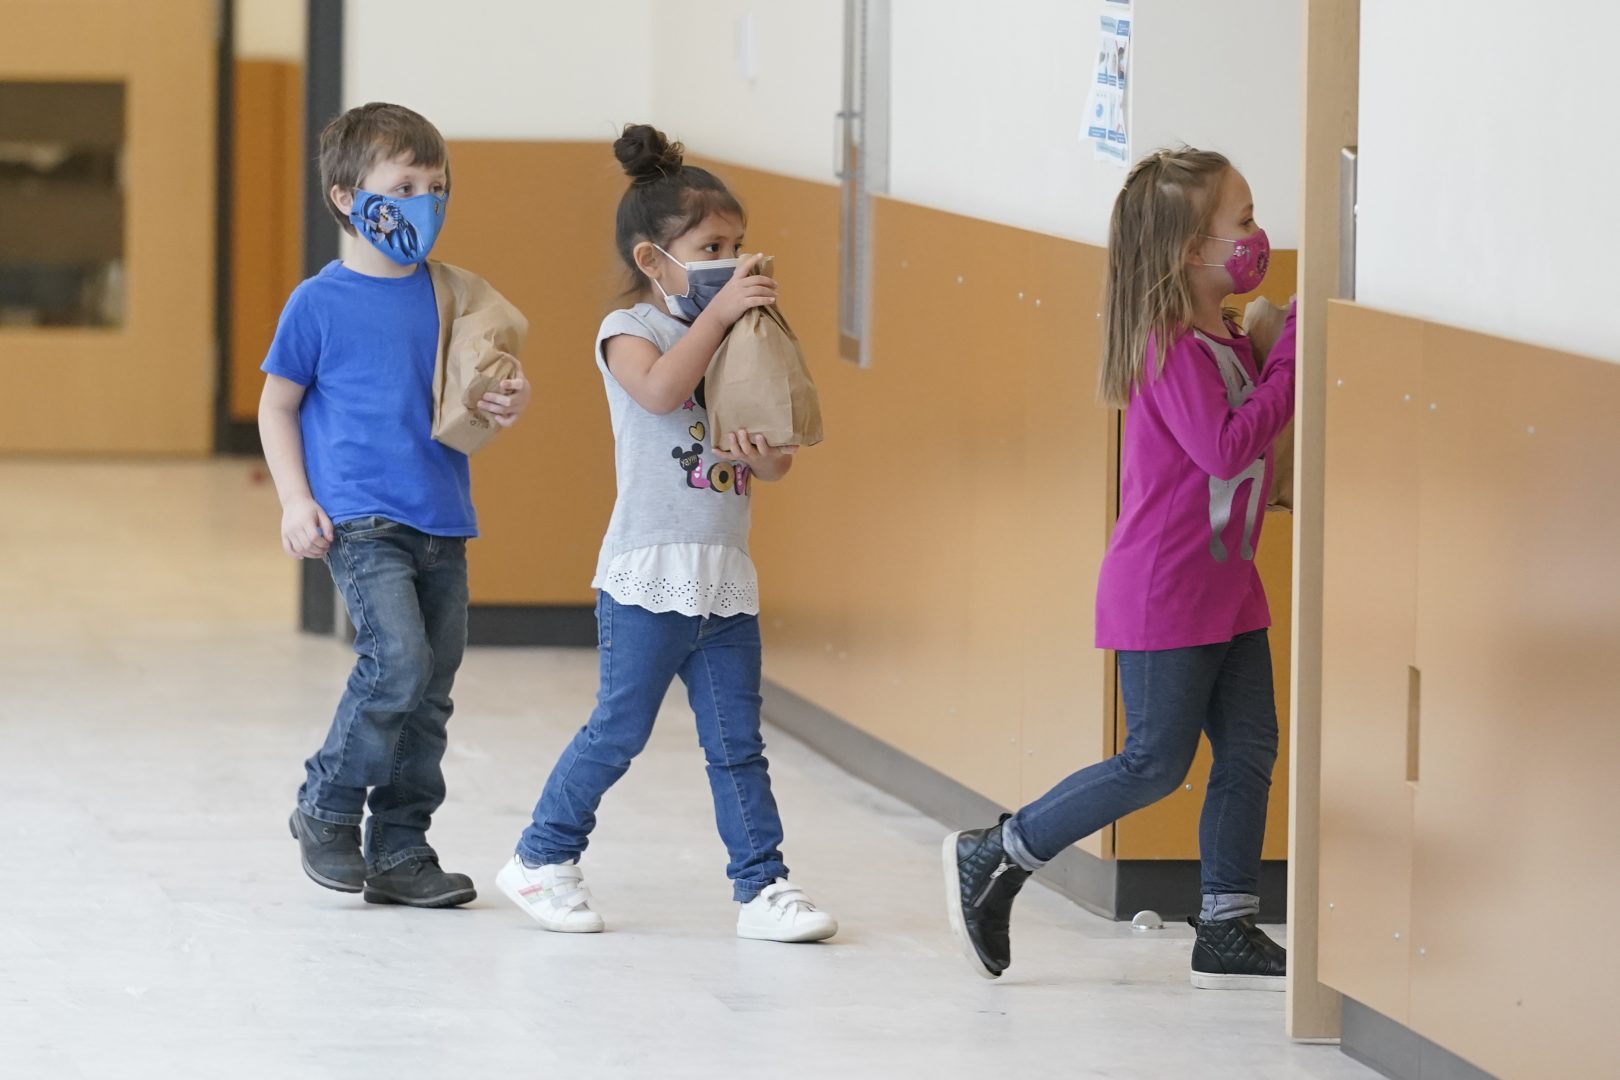 Students carry sack lunches as they walk through a hall, Tuesday, Feb. 2, 2021, at Elk Ridge Elementary School in Buckley, Wash.